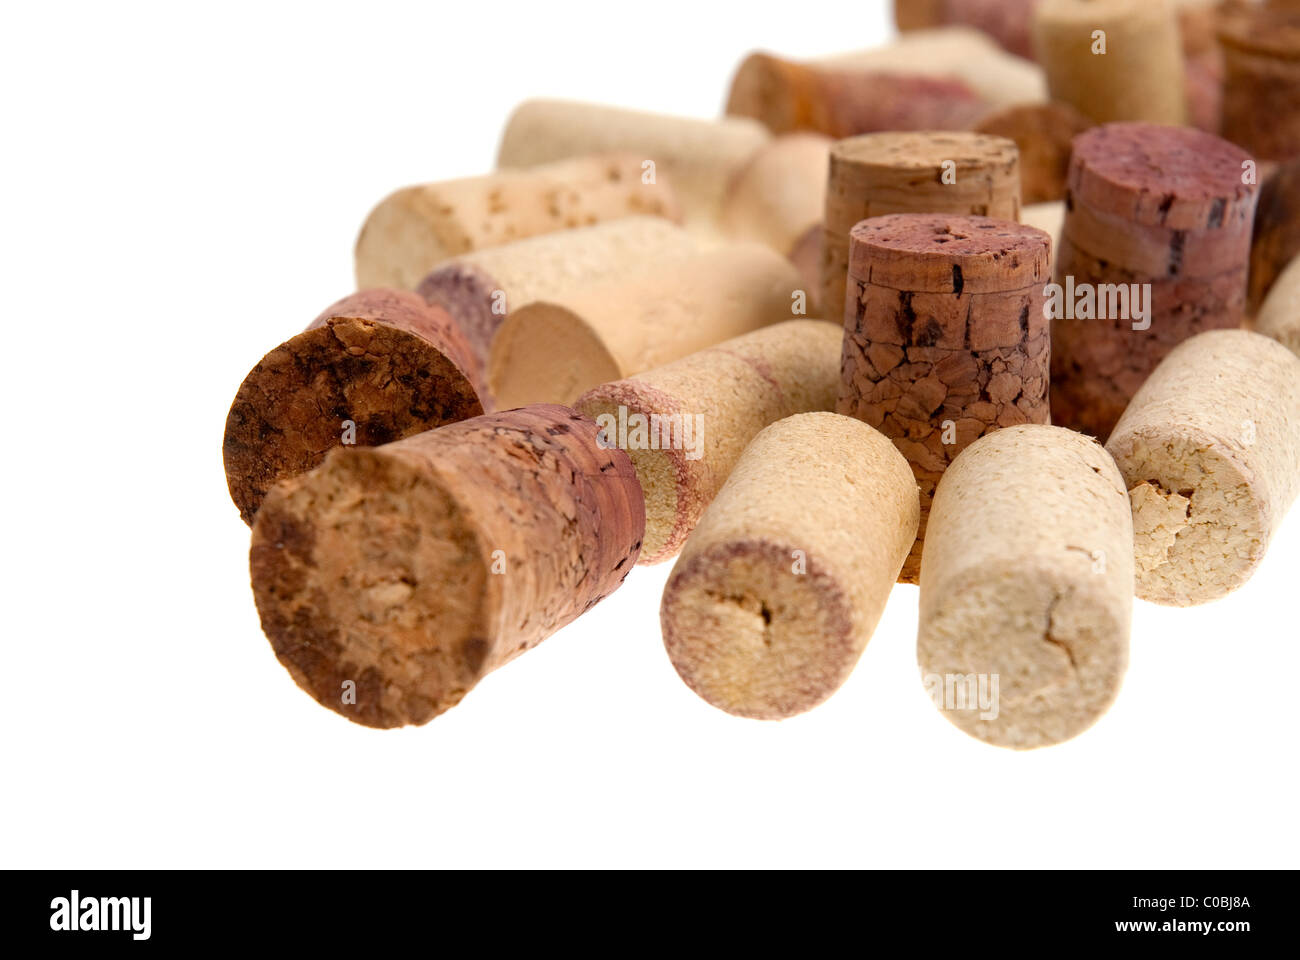 Corks from bottles guilt isolated on white background. Stock Photo